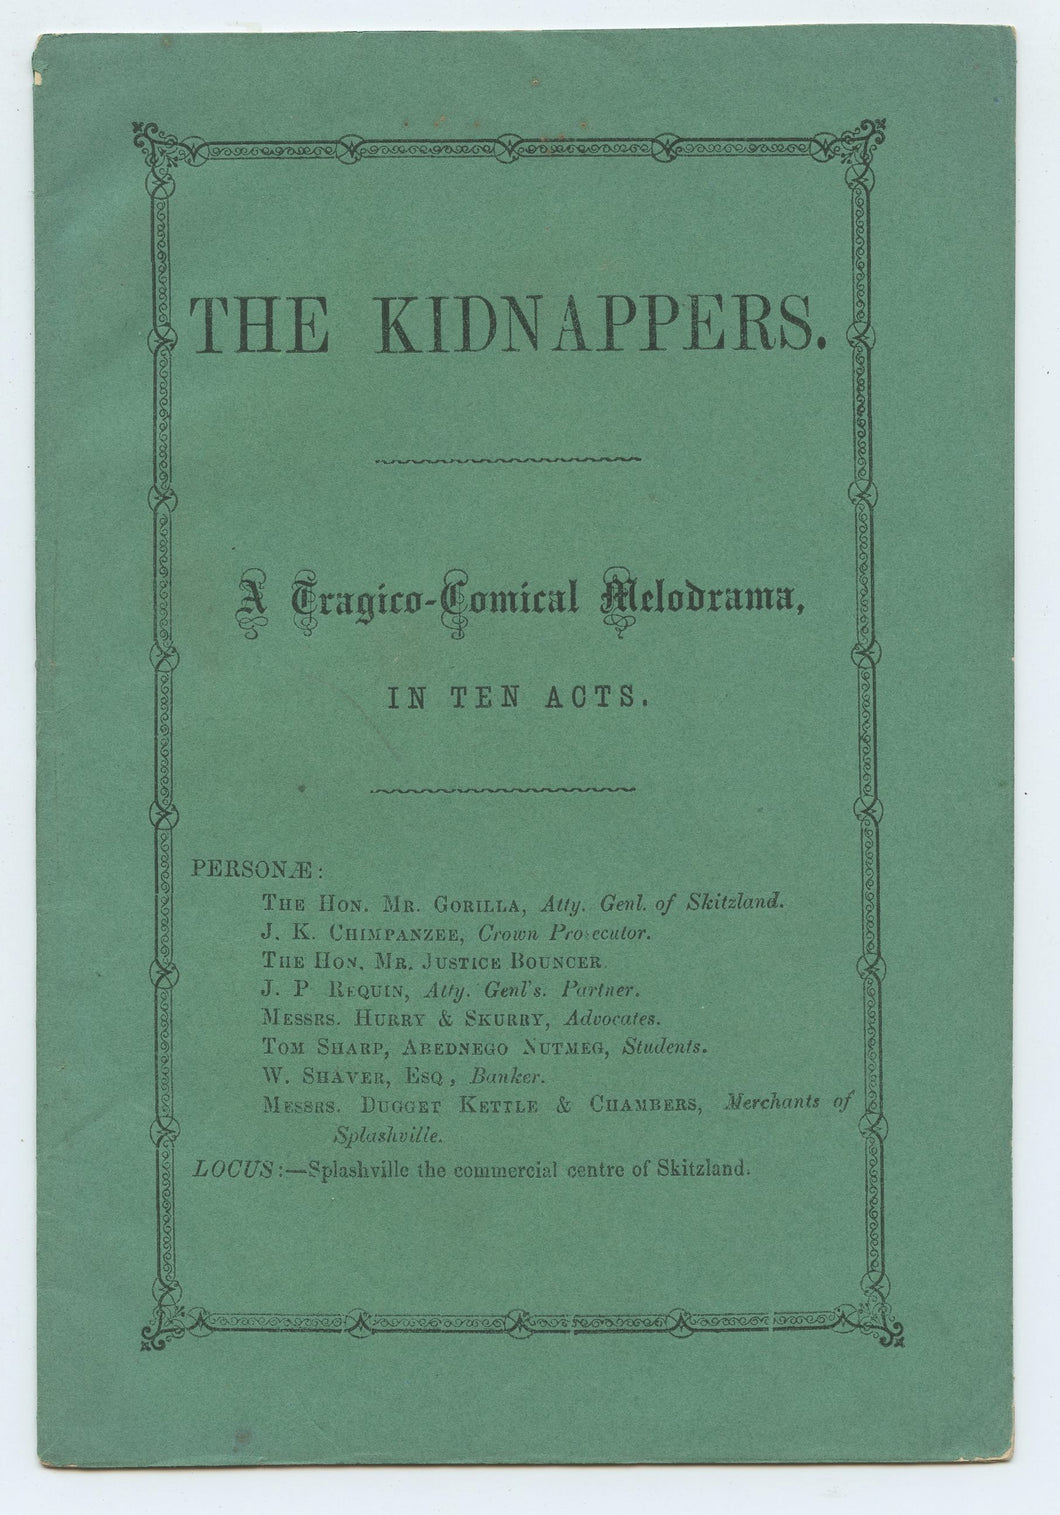 The Kidnappers. A Tragico-Comical Melodrama, In Ten Acts